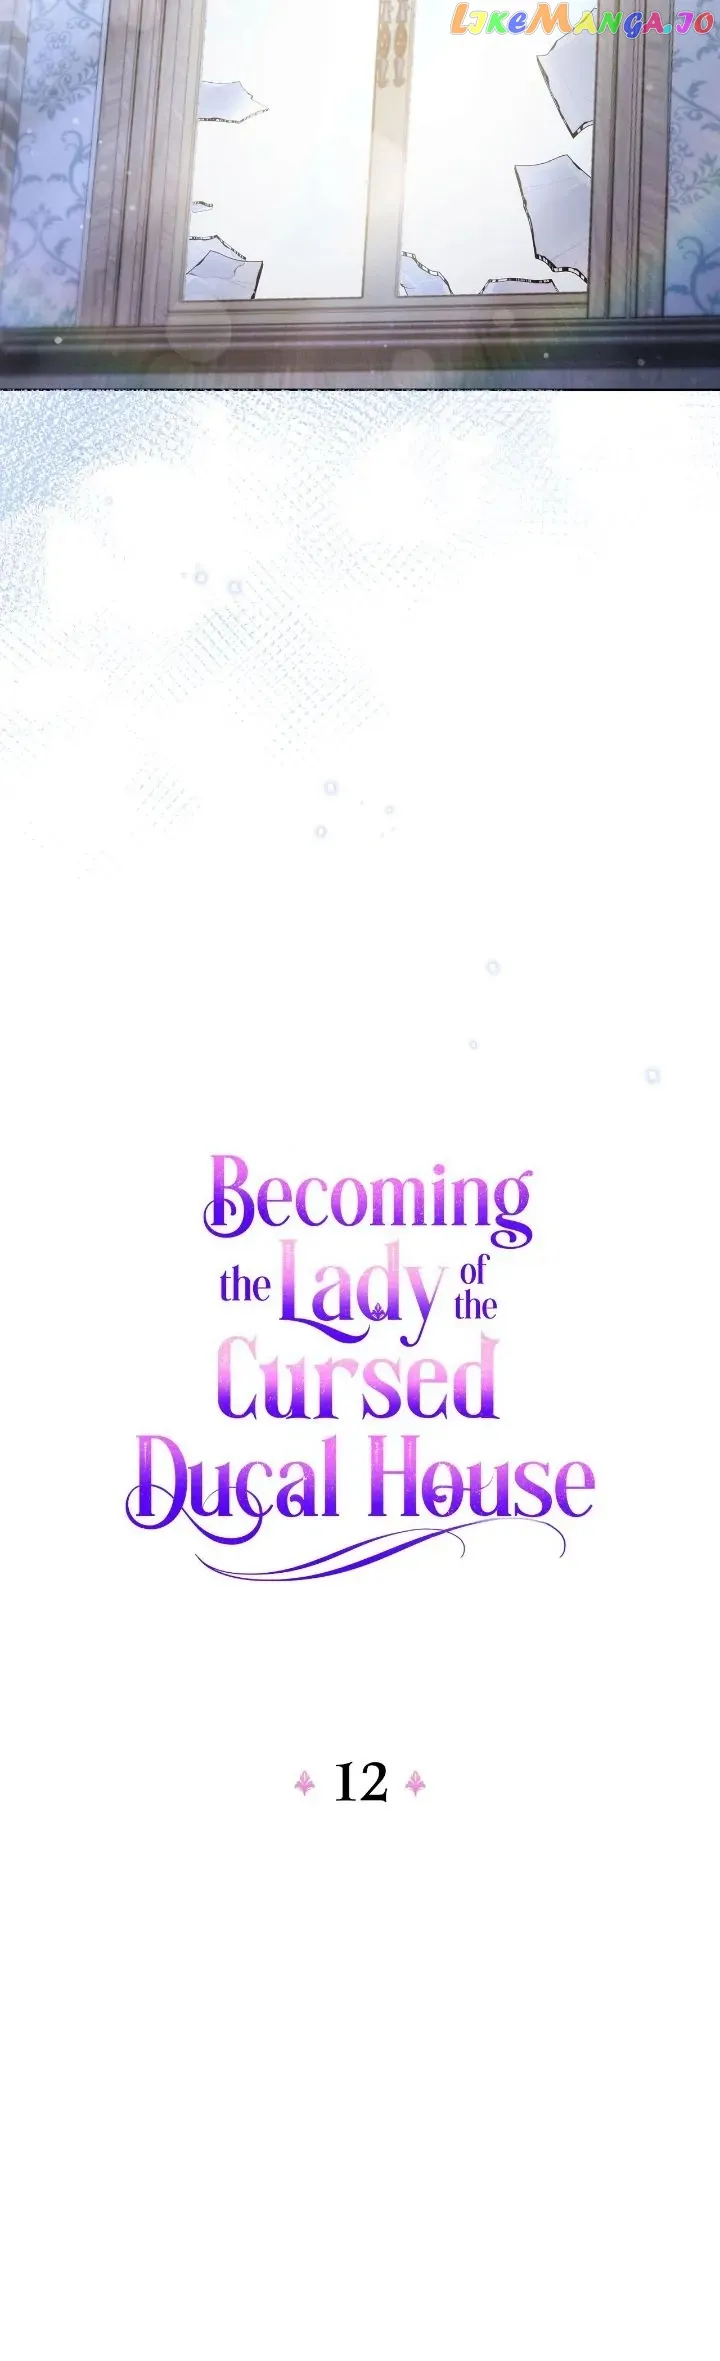 Becoming the Lady of the Cursed Ducal House chapter 12